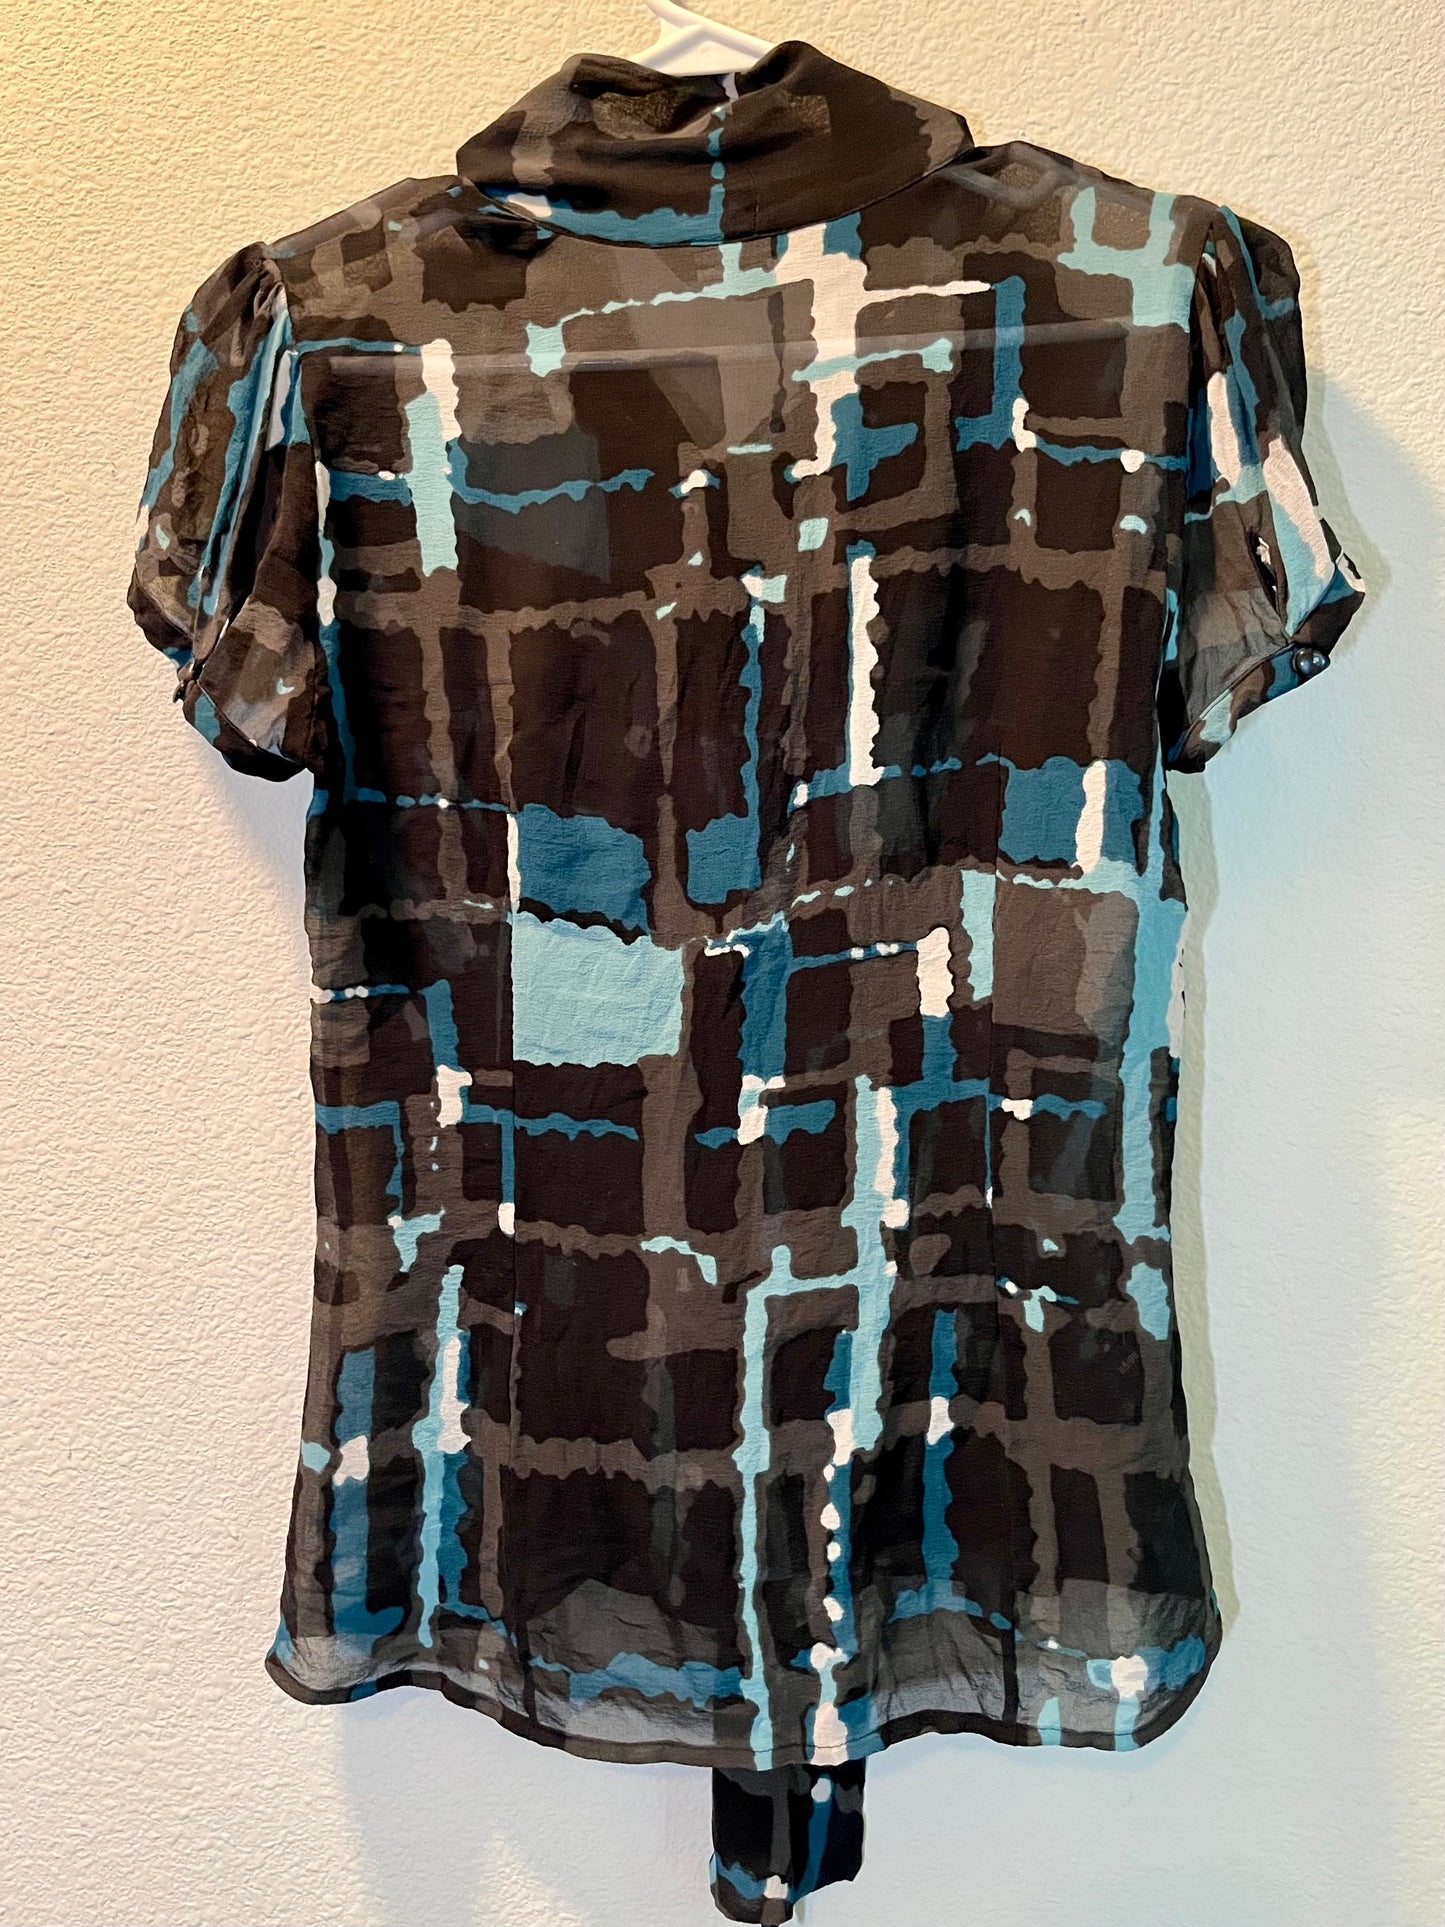 Express Design Studio Sheer Buttondown Top Size Medium - Tales from the Tangle